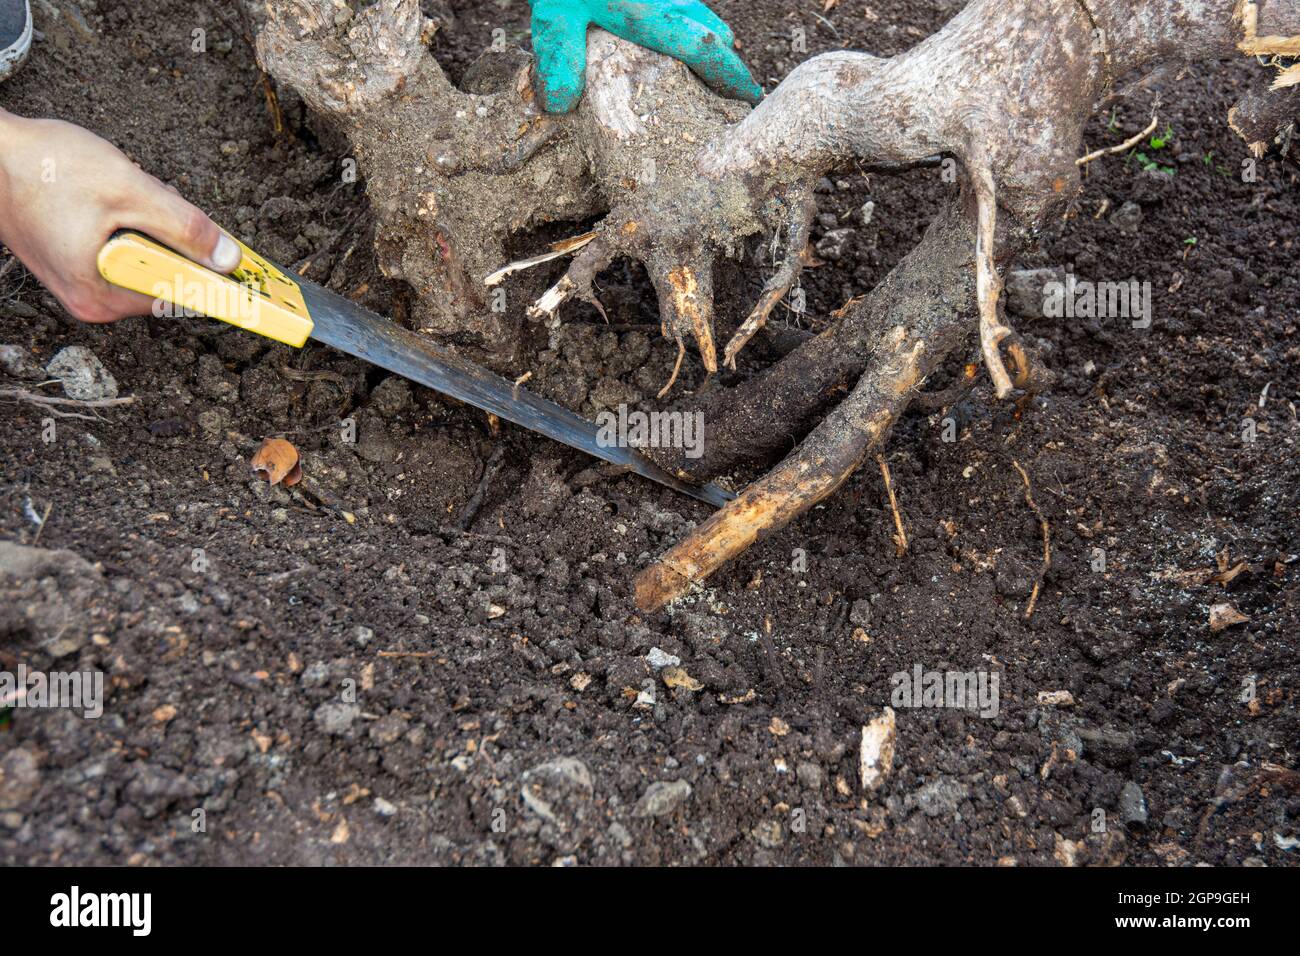 Sawing with a saw to remove a tree stump in the garden Stock Photo - Alamy